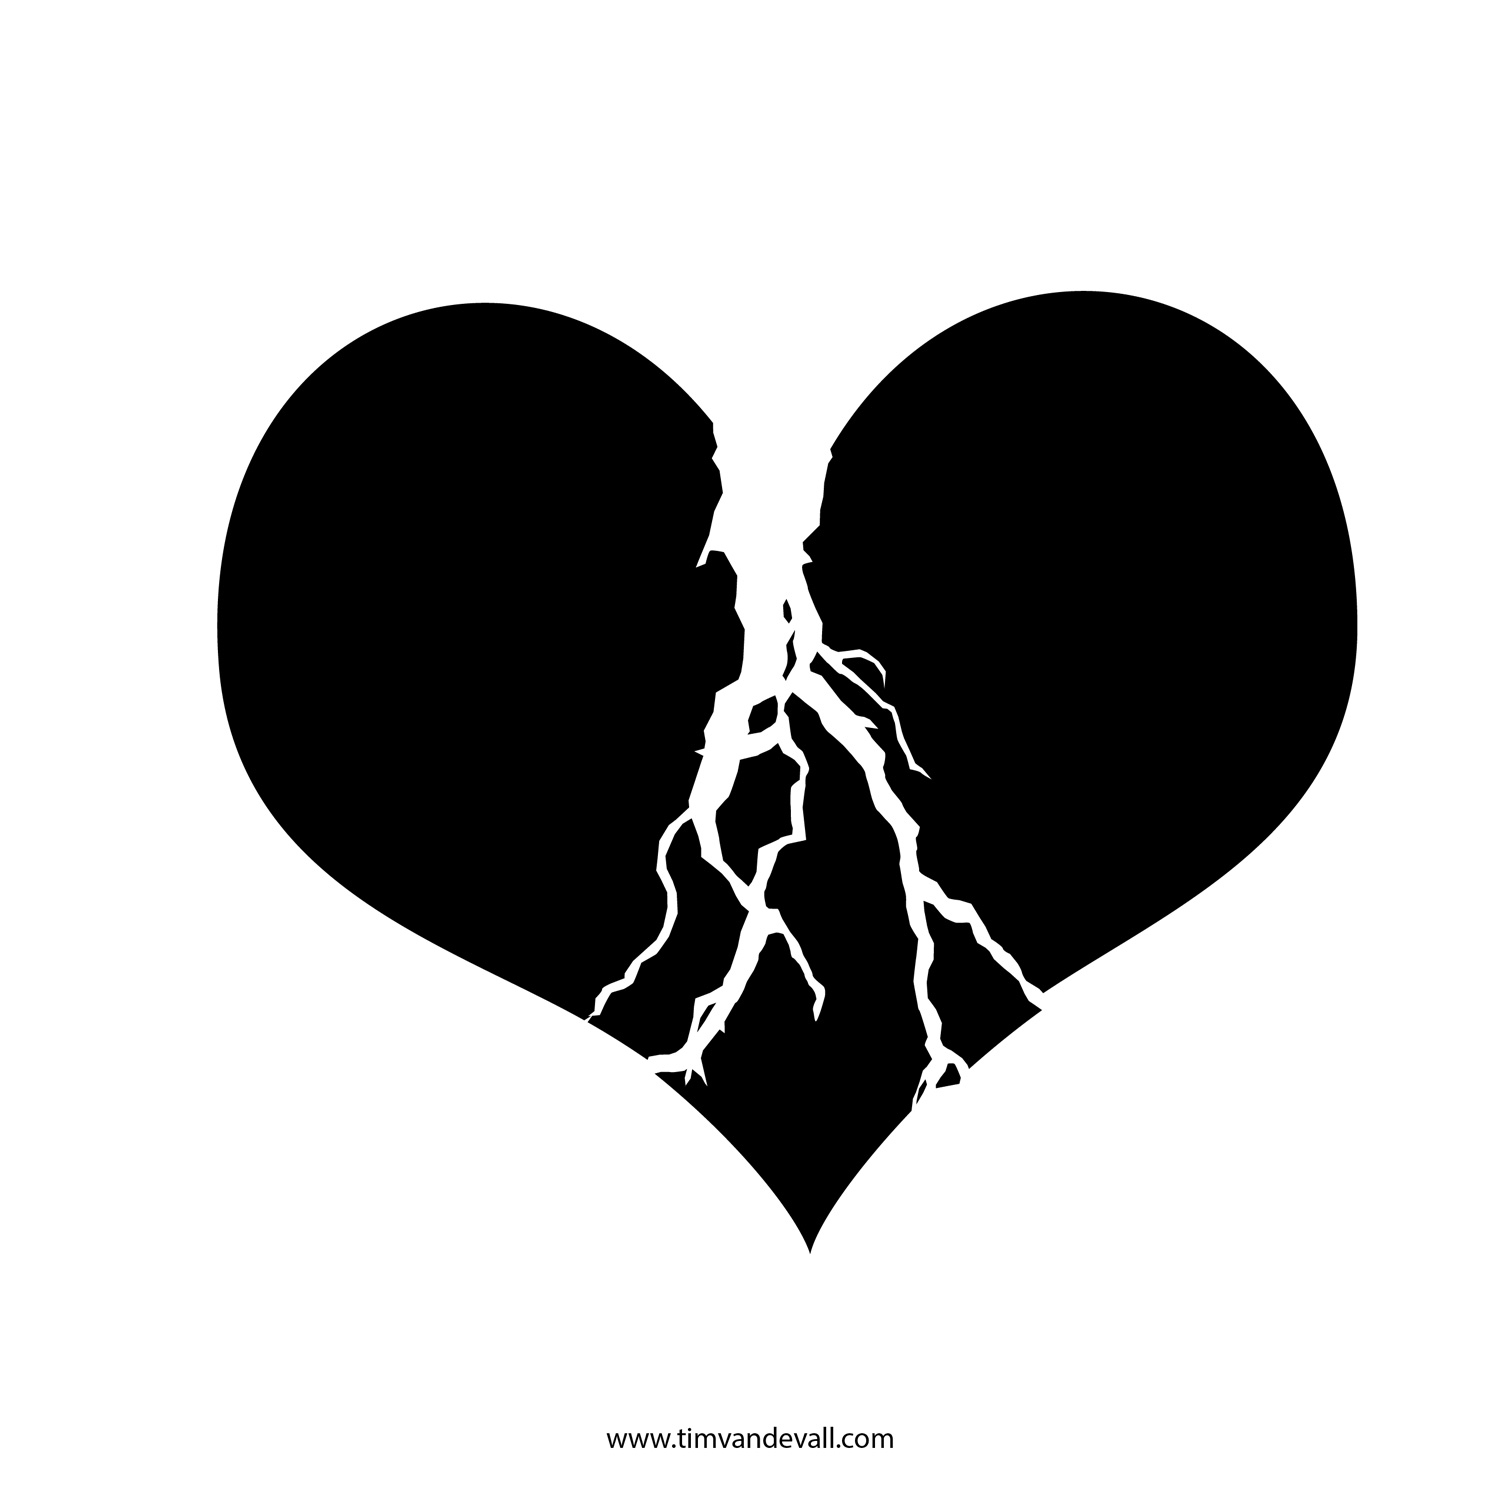 Heart black and white broken heart clipart black and white free 2 